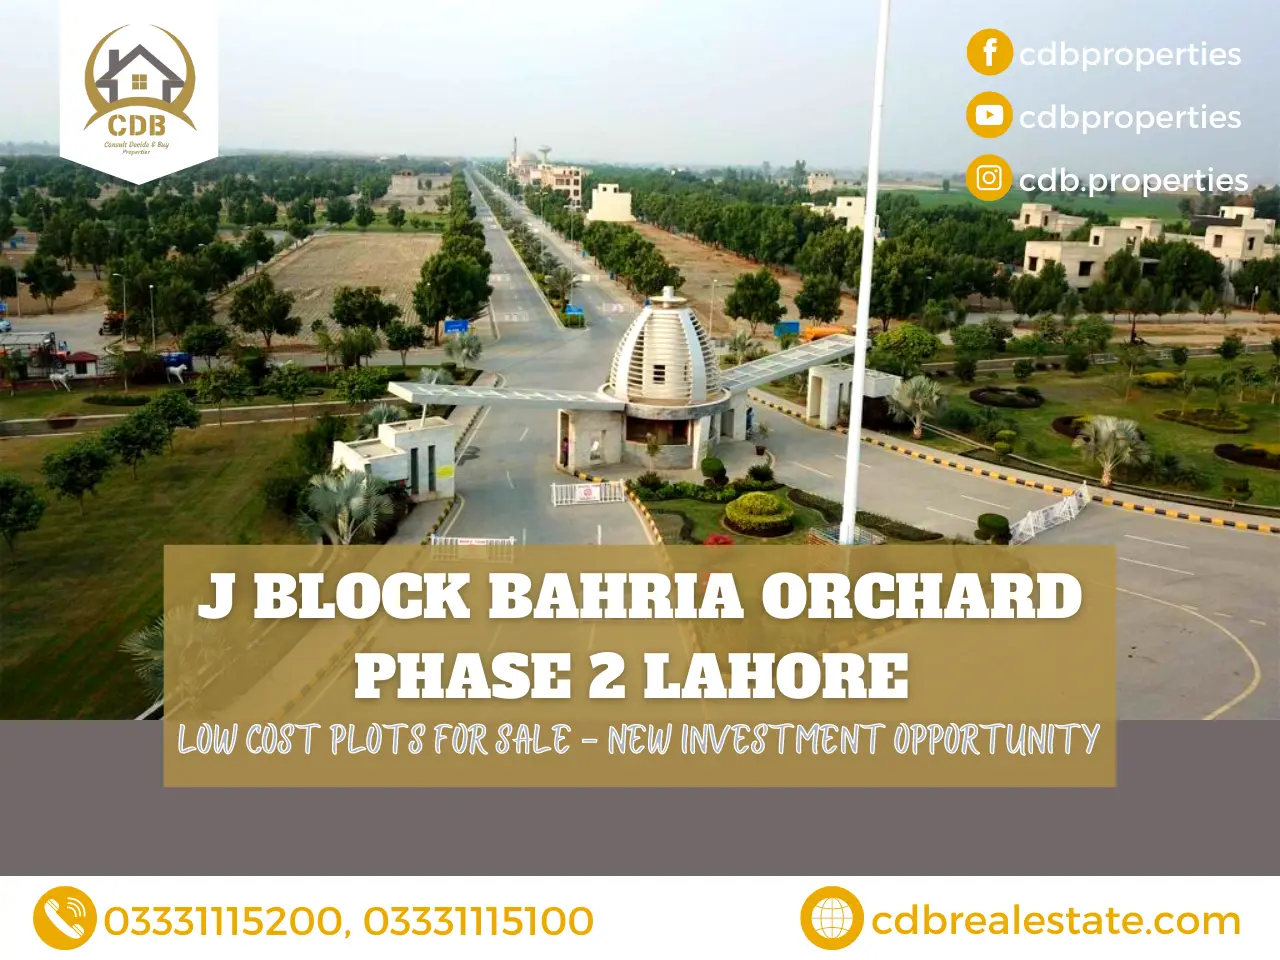 J Block Bahria Orchard Phase 2 Lahore Plots For Sale in Low Cost